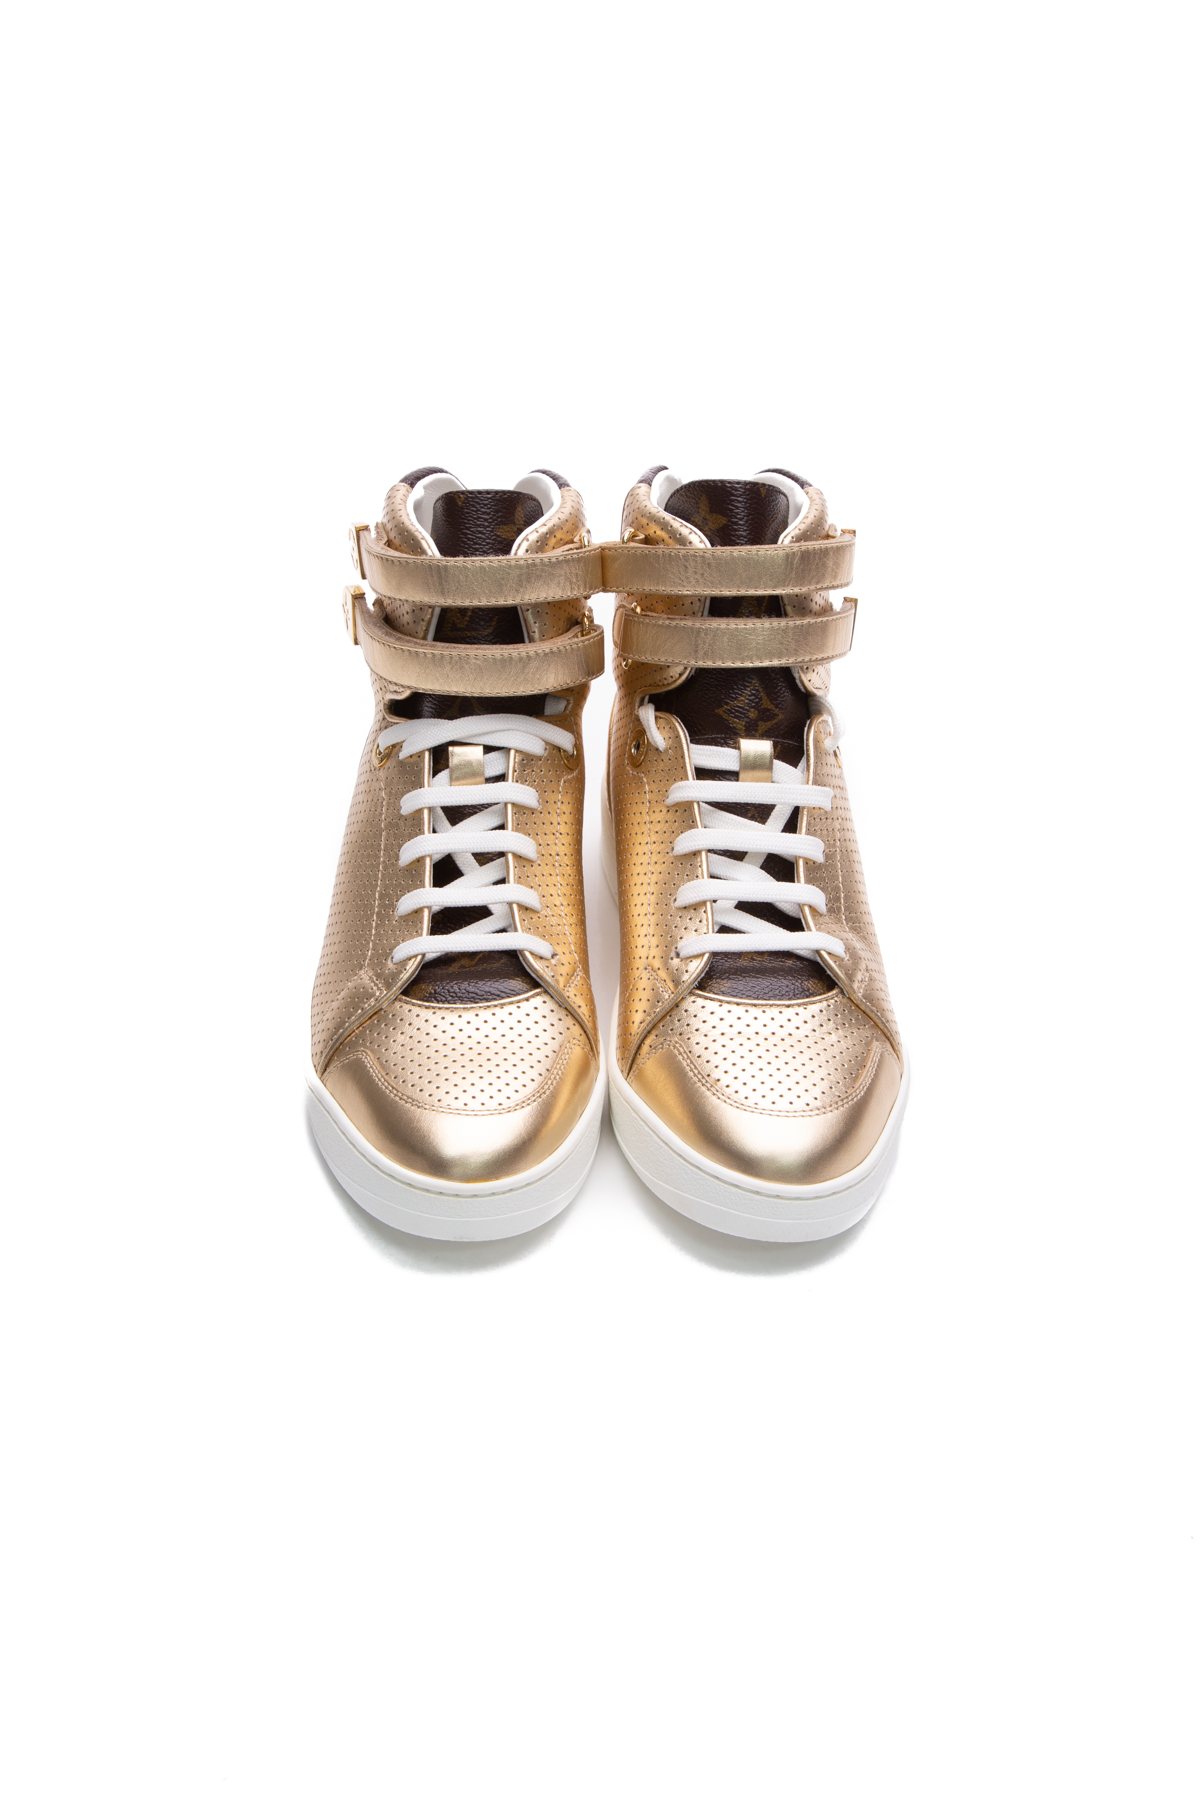 WMNS) LOUIS VUITTON LV Boombox High-top Sport Shoes Pink/White